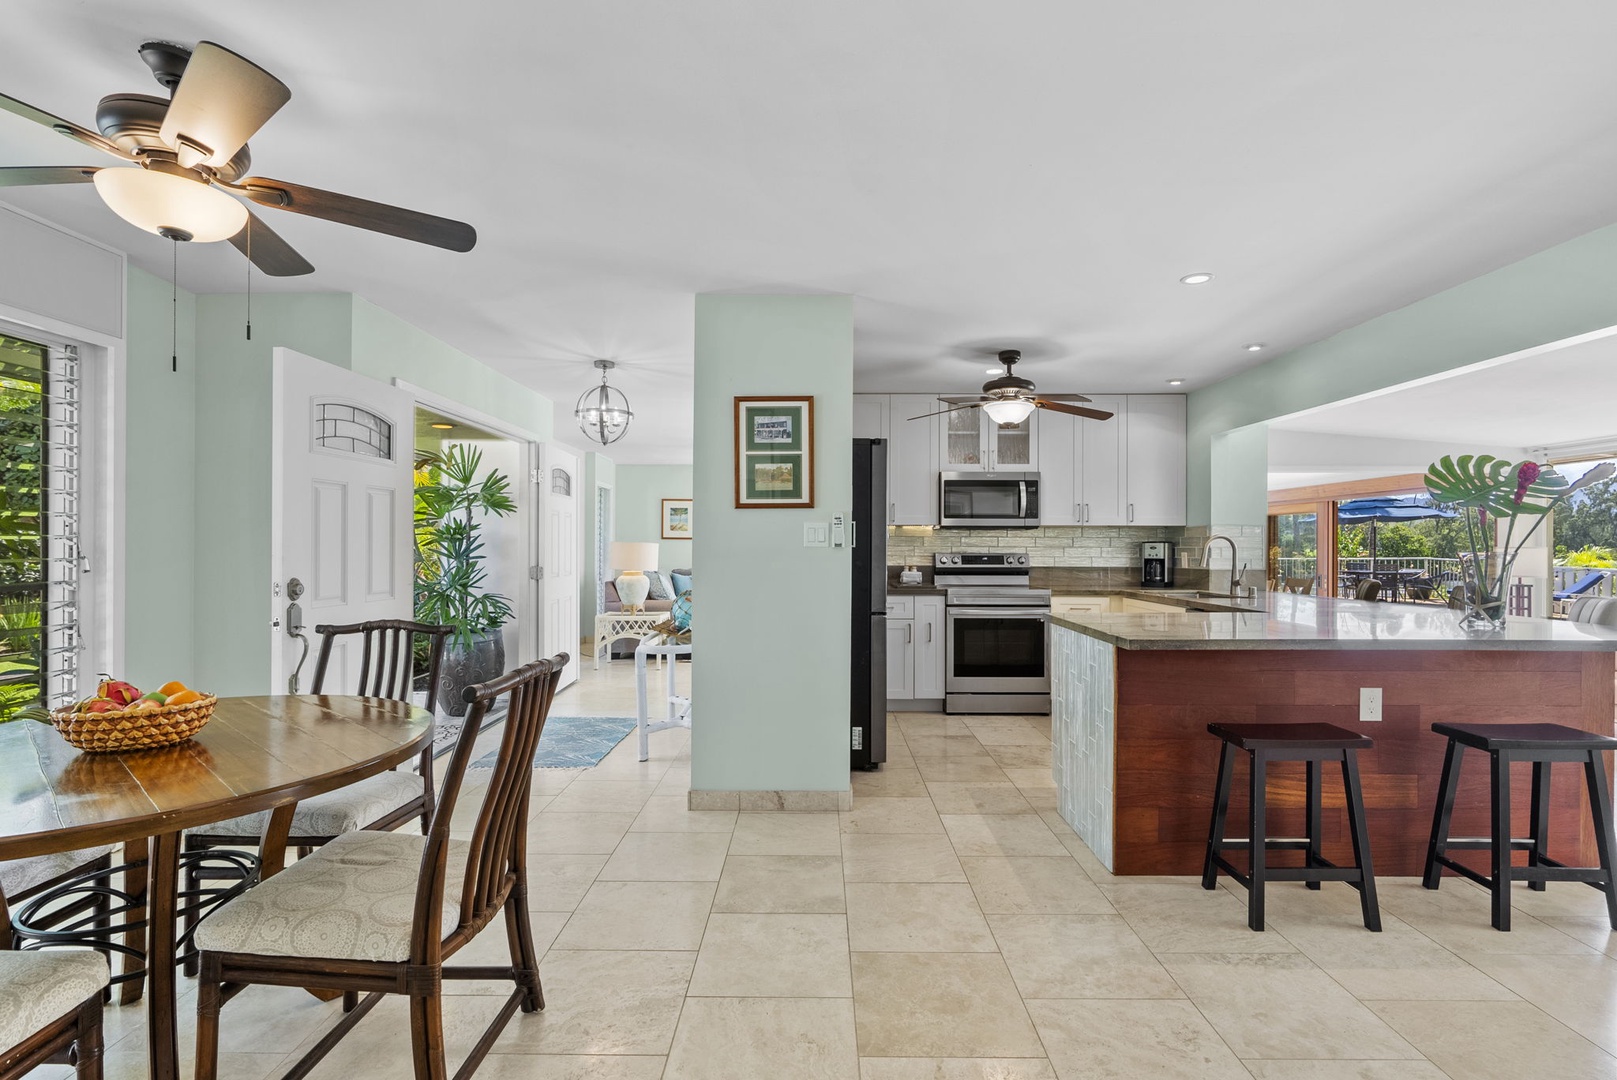 Kailua Vacation Rentals, Hale Aloha - A home with an open floorplan for seamless connection.